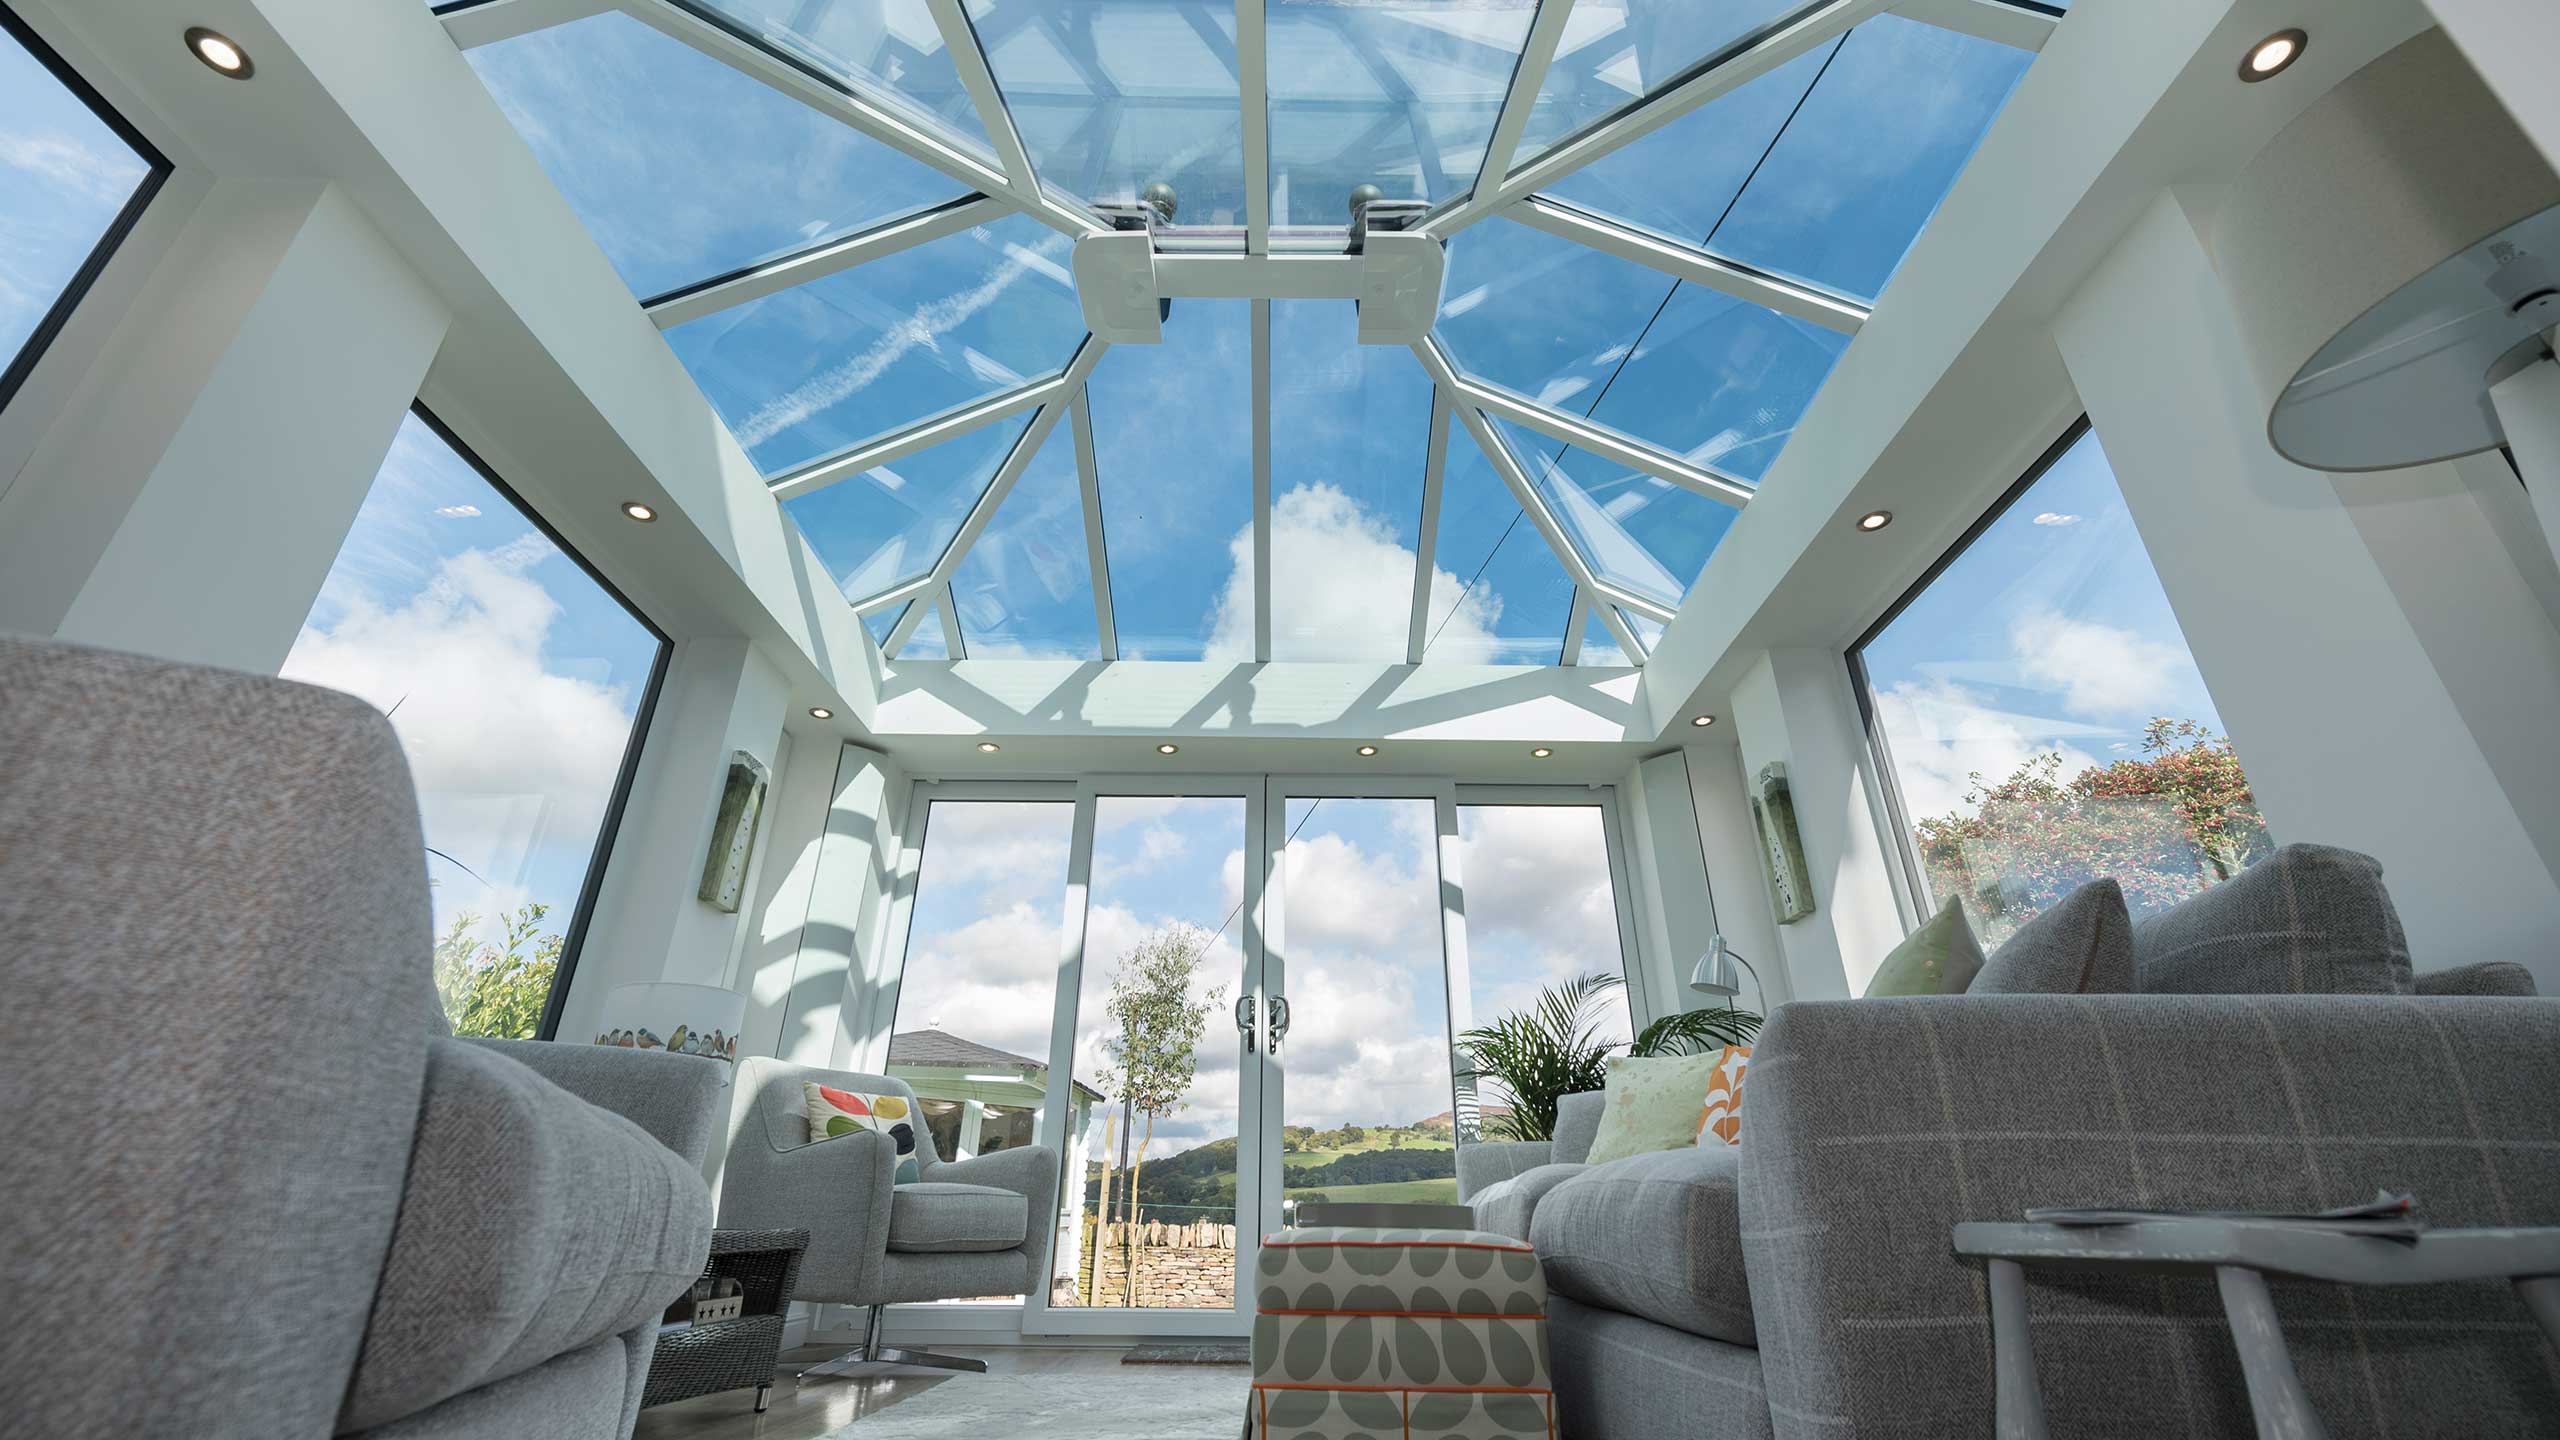 Bespoke Conservatories Supplied And Fitted By Stratton Glass